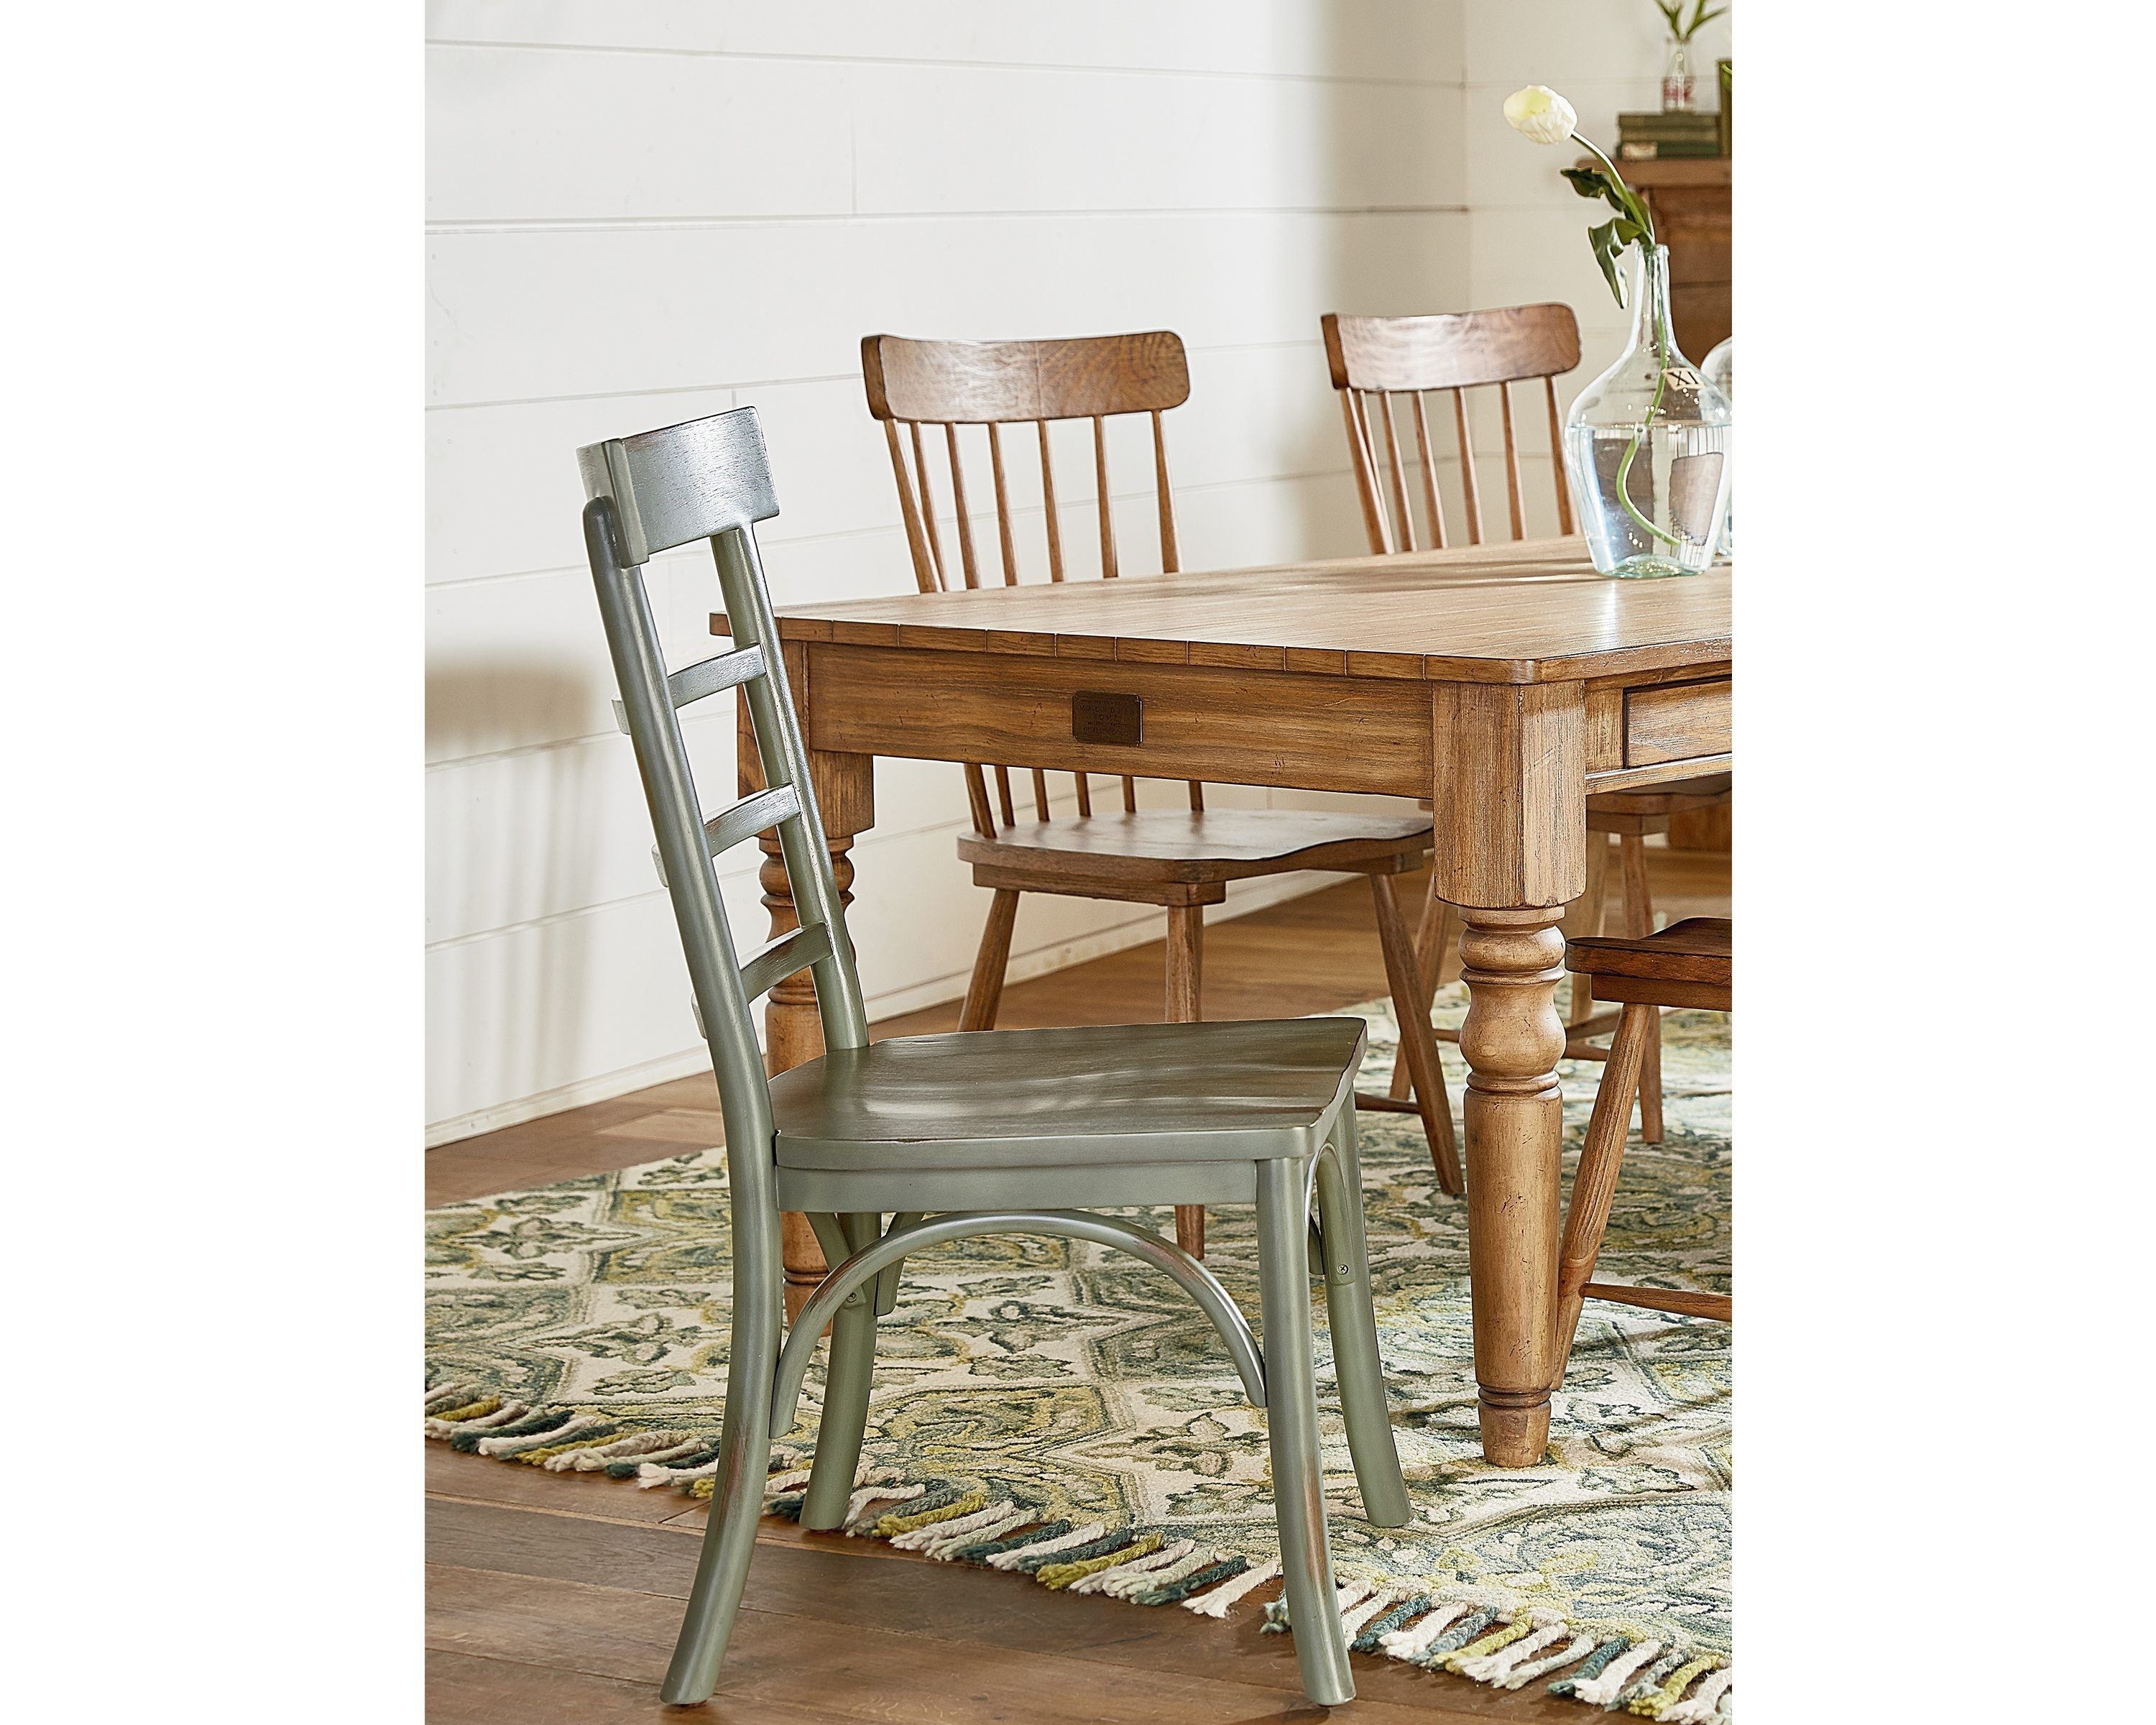 Magnolia Home Harper Chimney Side Chairs For Well Known Harper Side Chair – Magnolia Home (View 4 of 20)